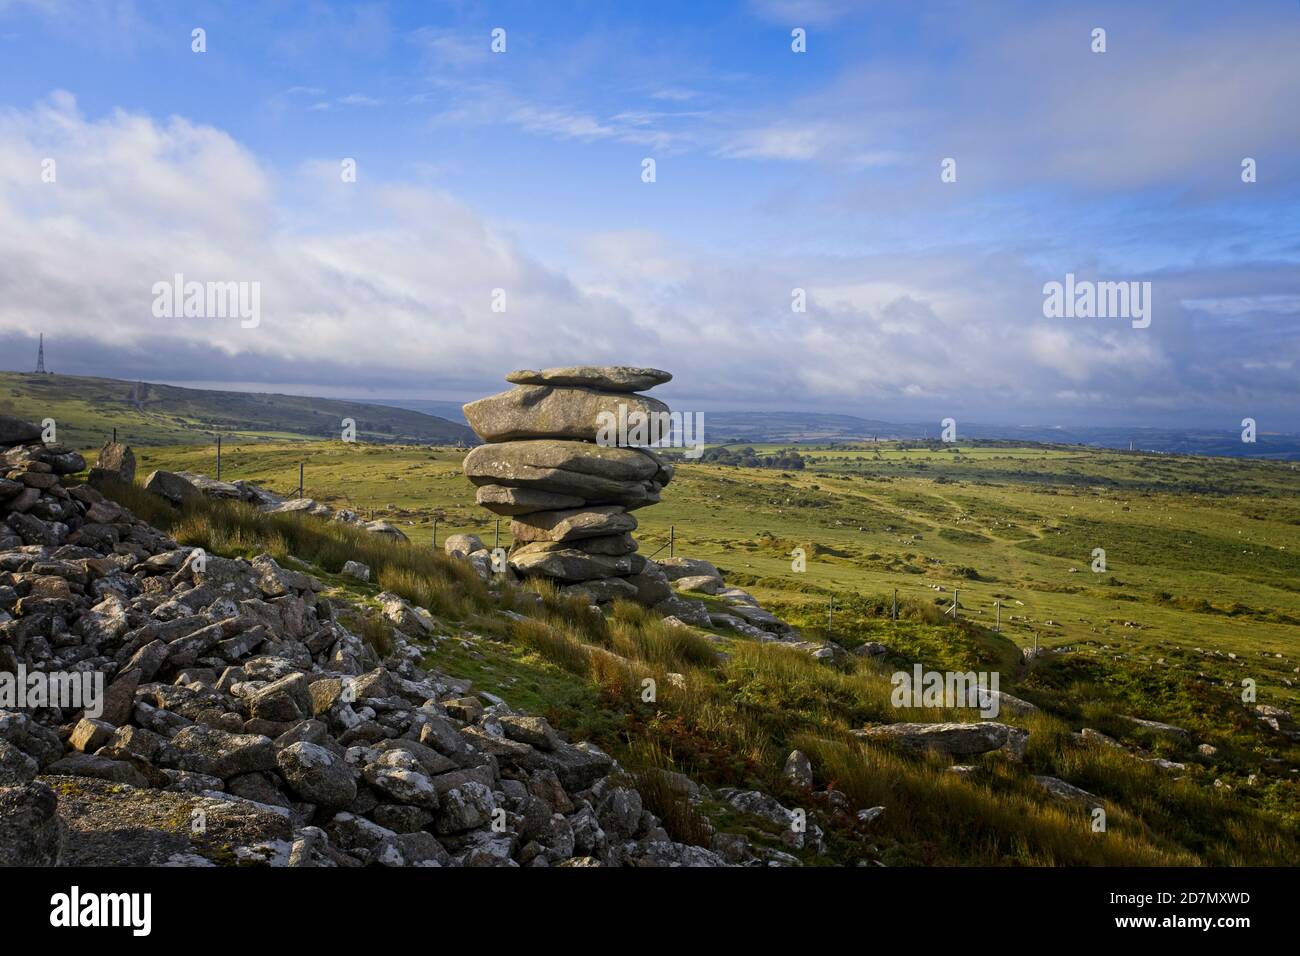 The Cheesewring, a natural formation of weathered granite on Stowe's Hill, Bodmin Moor, near Minions, Cornwall, England, UK. Stock Photo